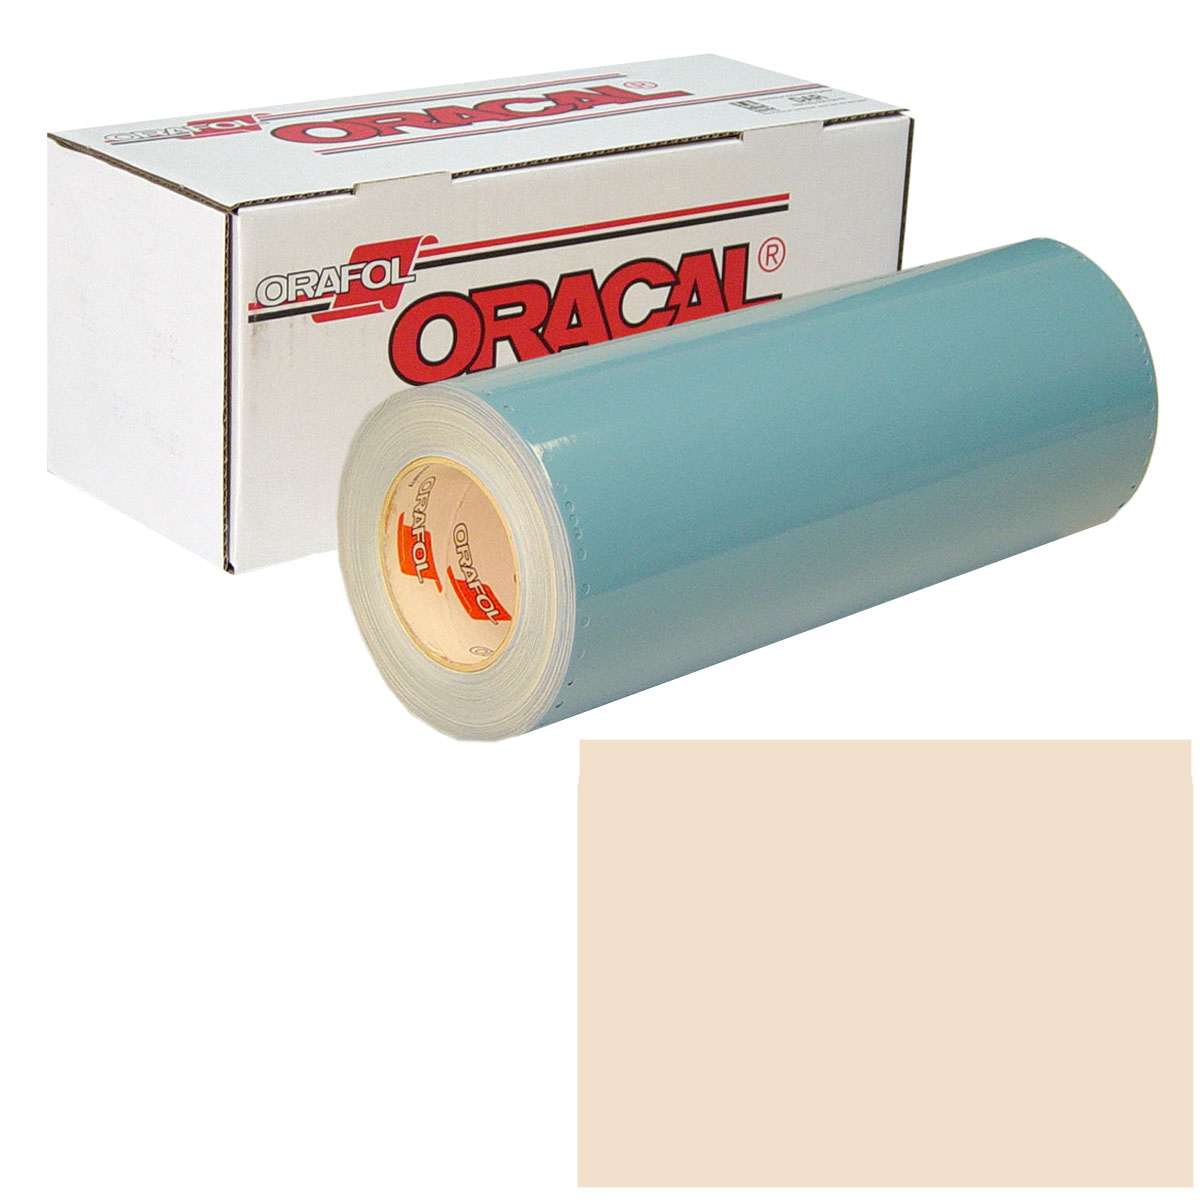 ORACAL 751 30in X 10yd 018 Light Ivory